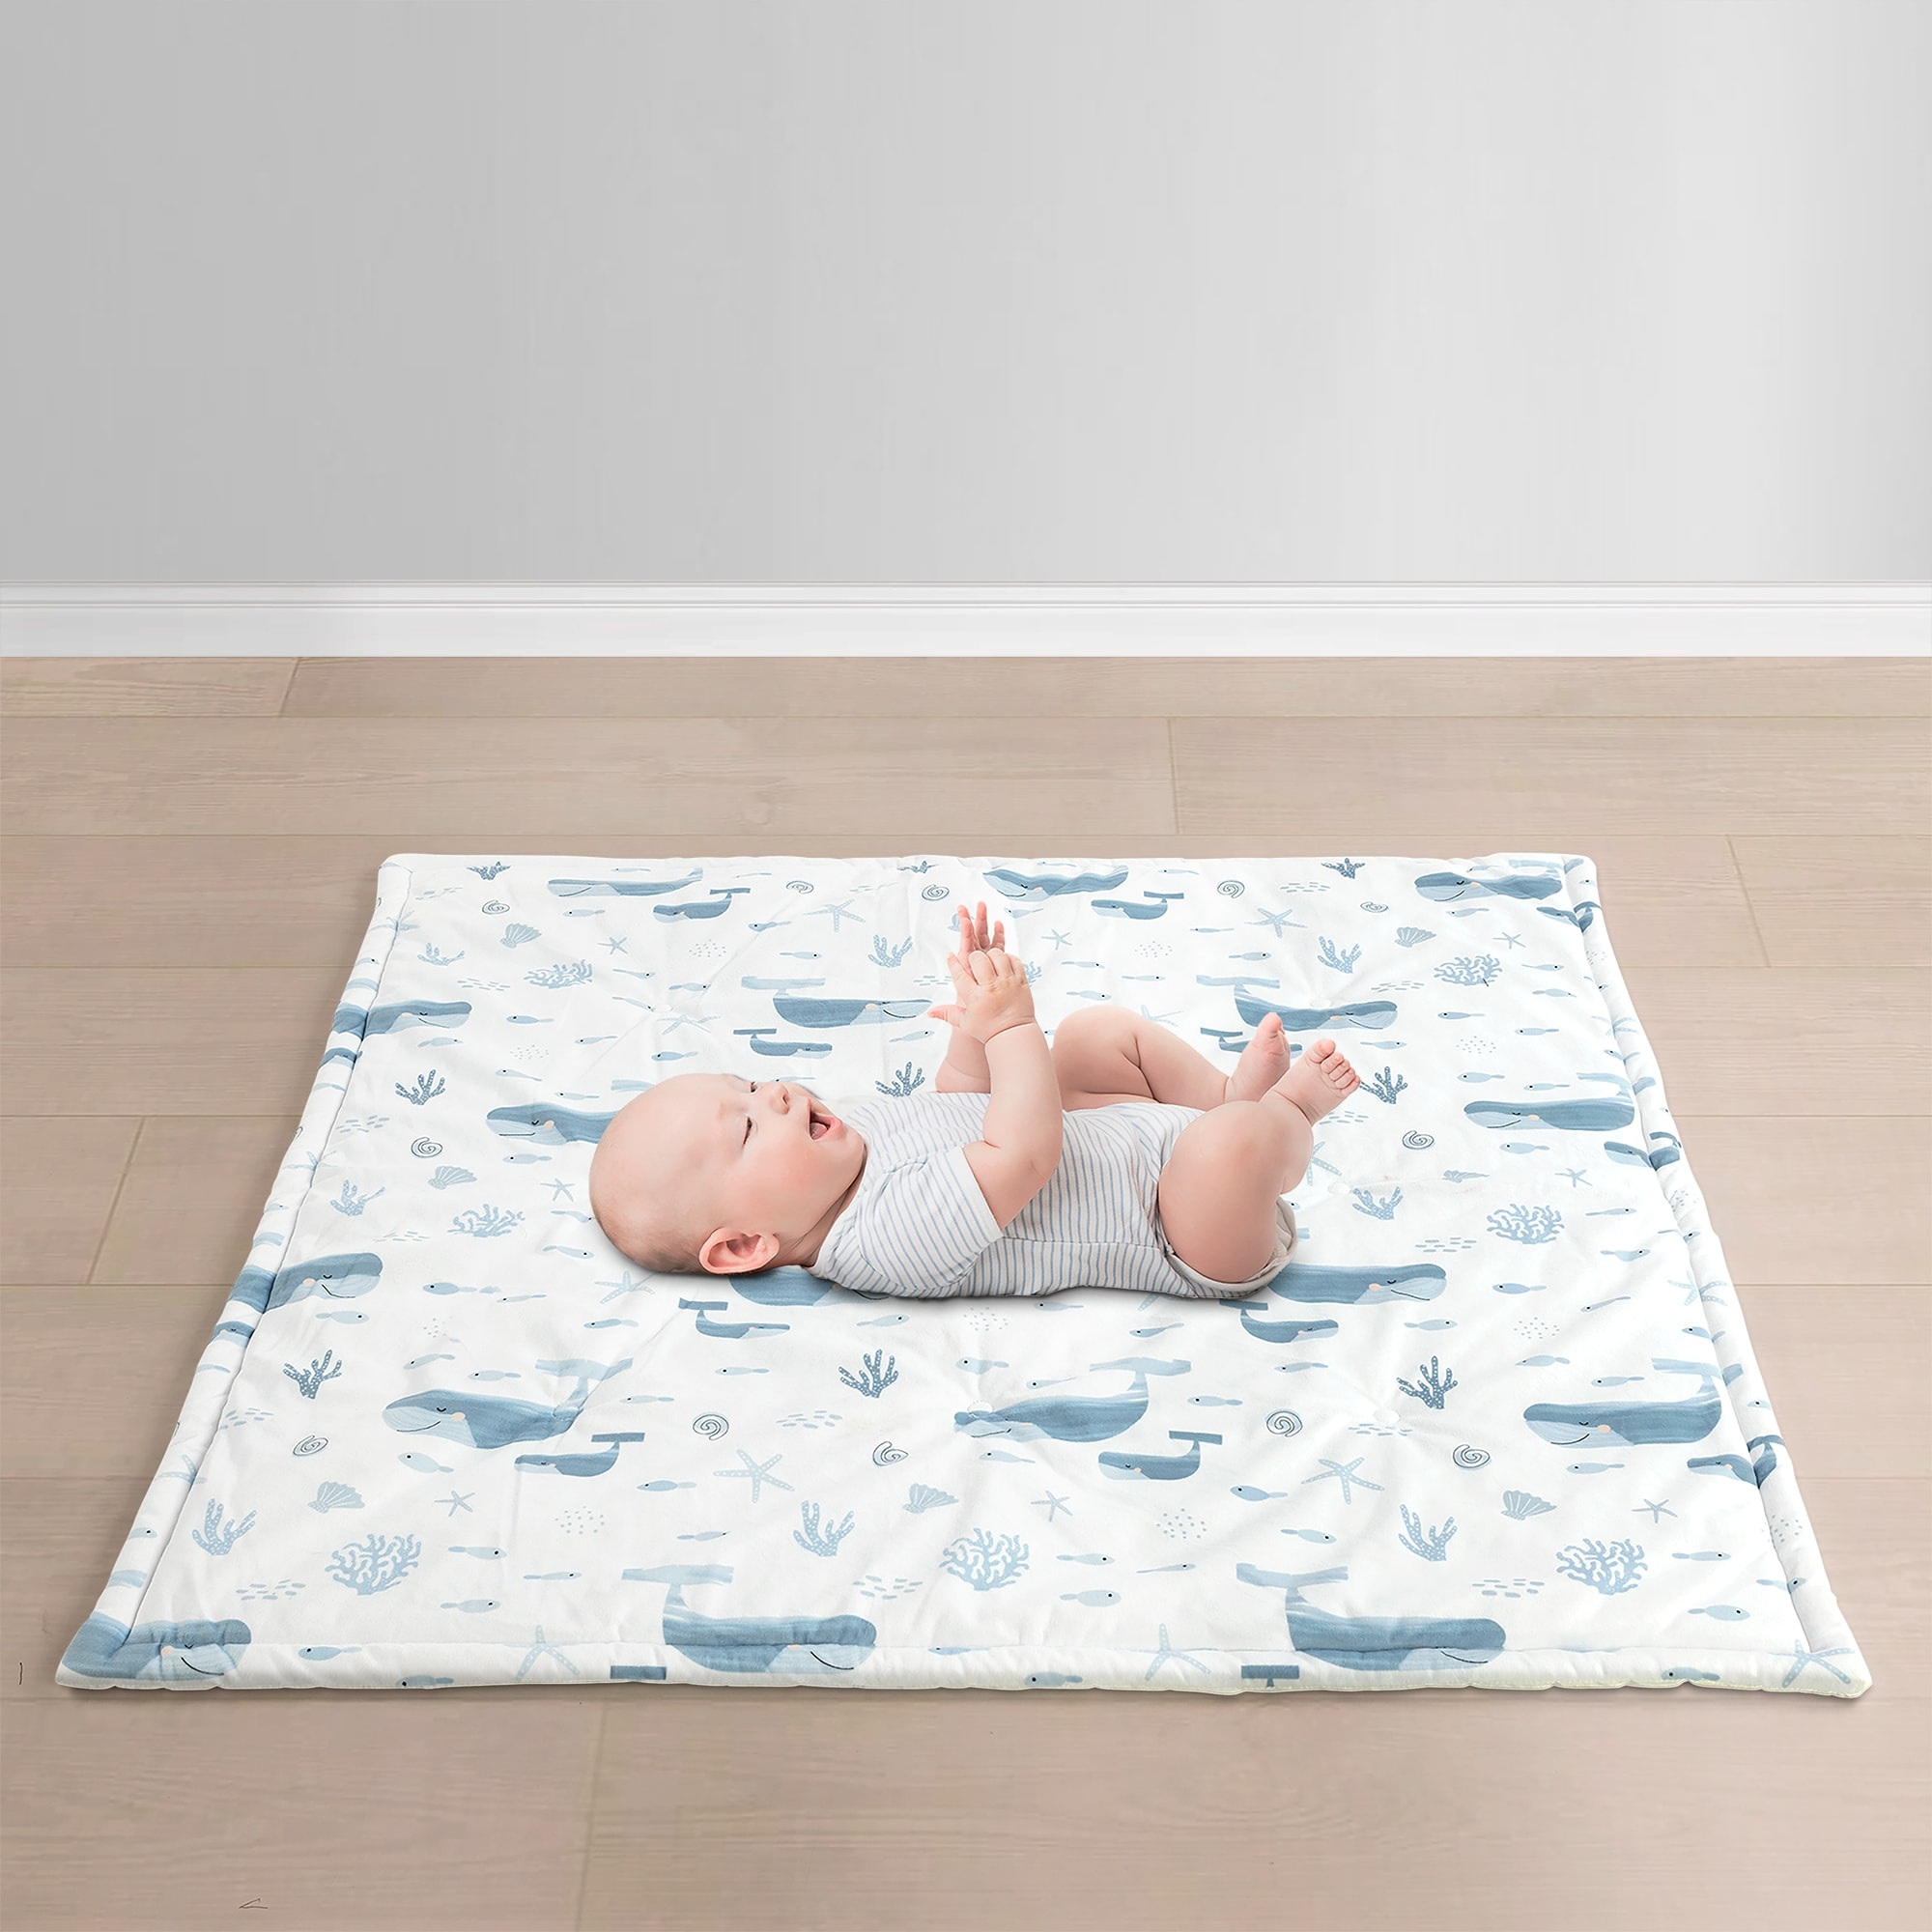 Lush Decor Seaside Baby Square With Border Play Mat